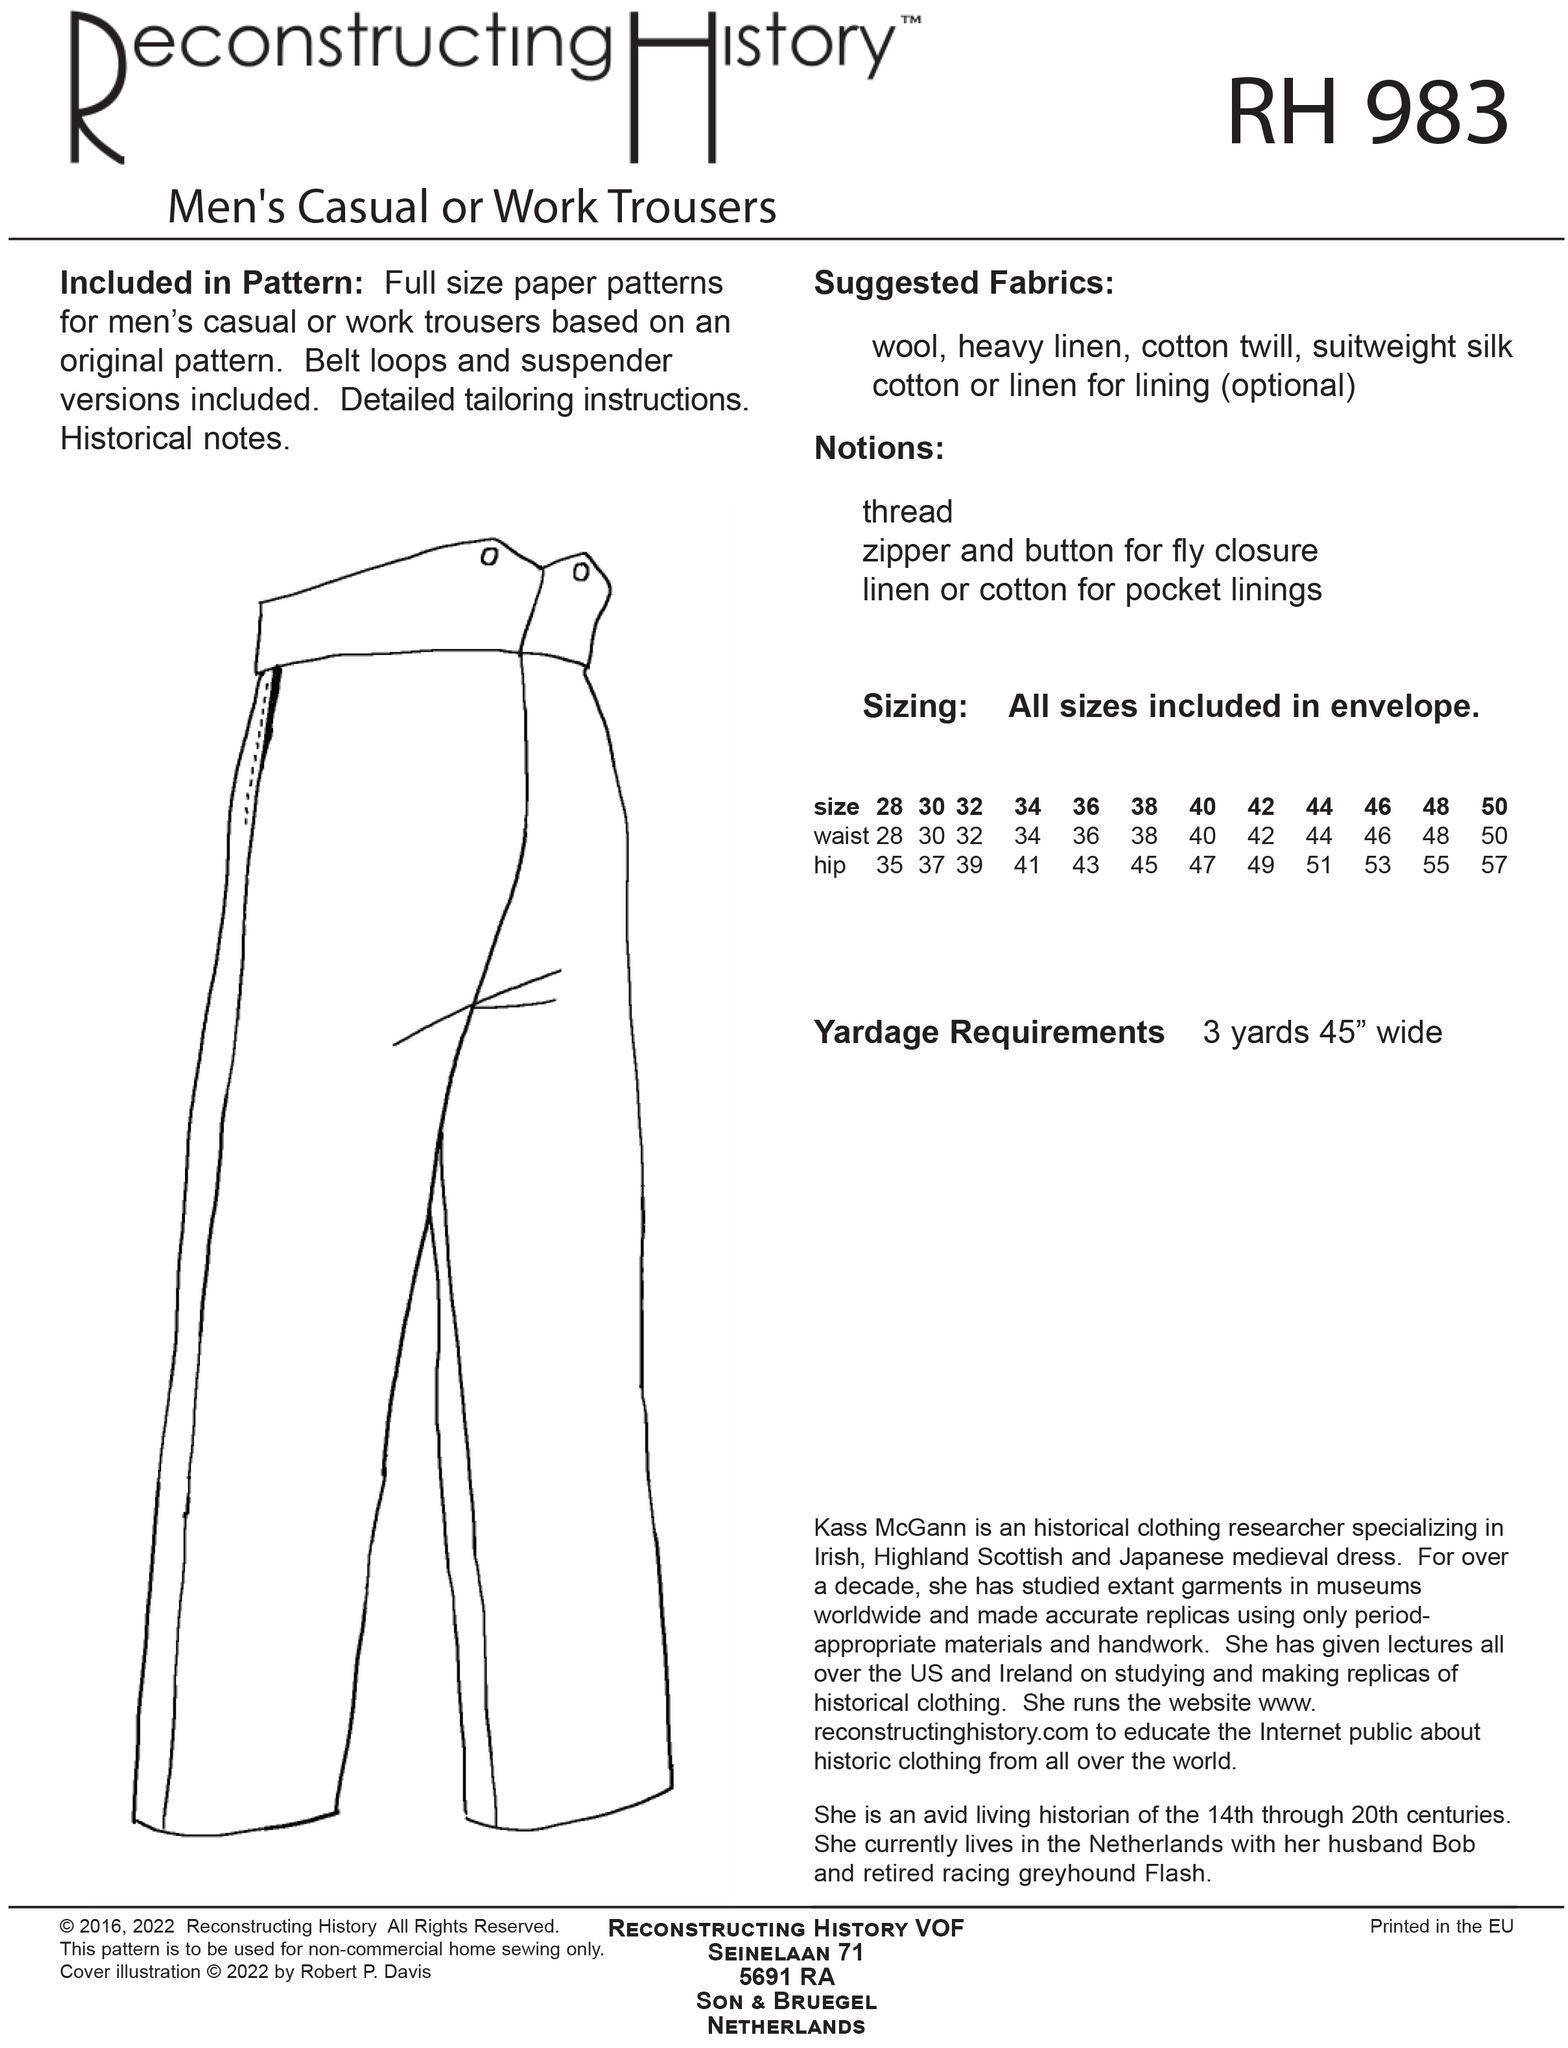 RH983 — Men's Casual or Work Trousers sewing pattern – Reconstructing ...